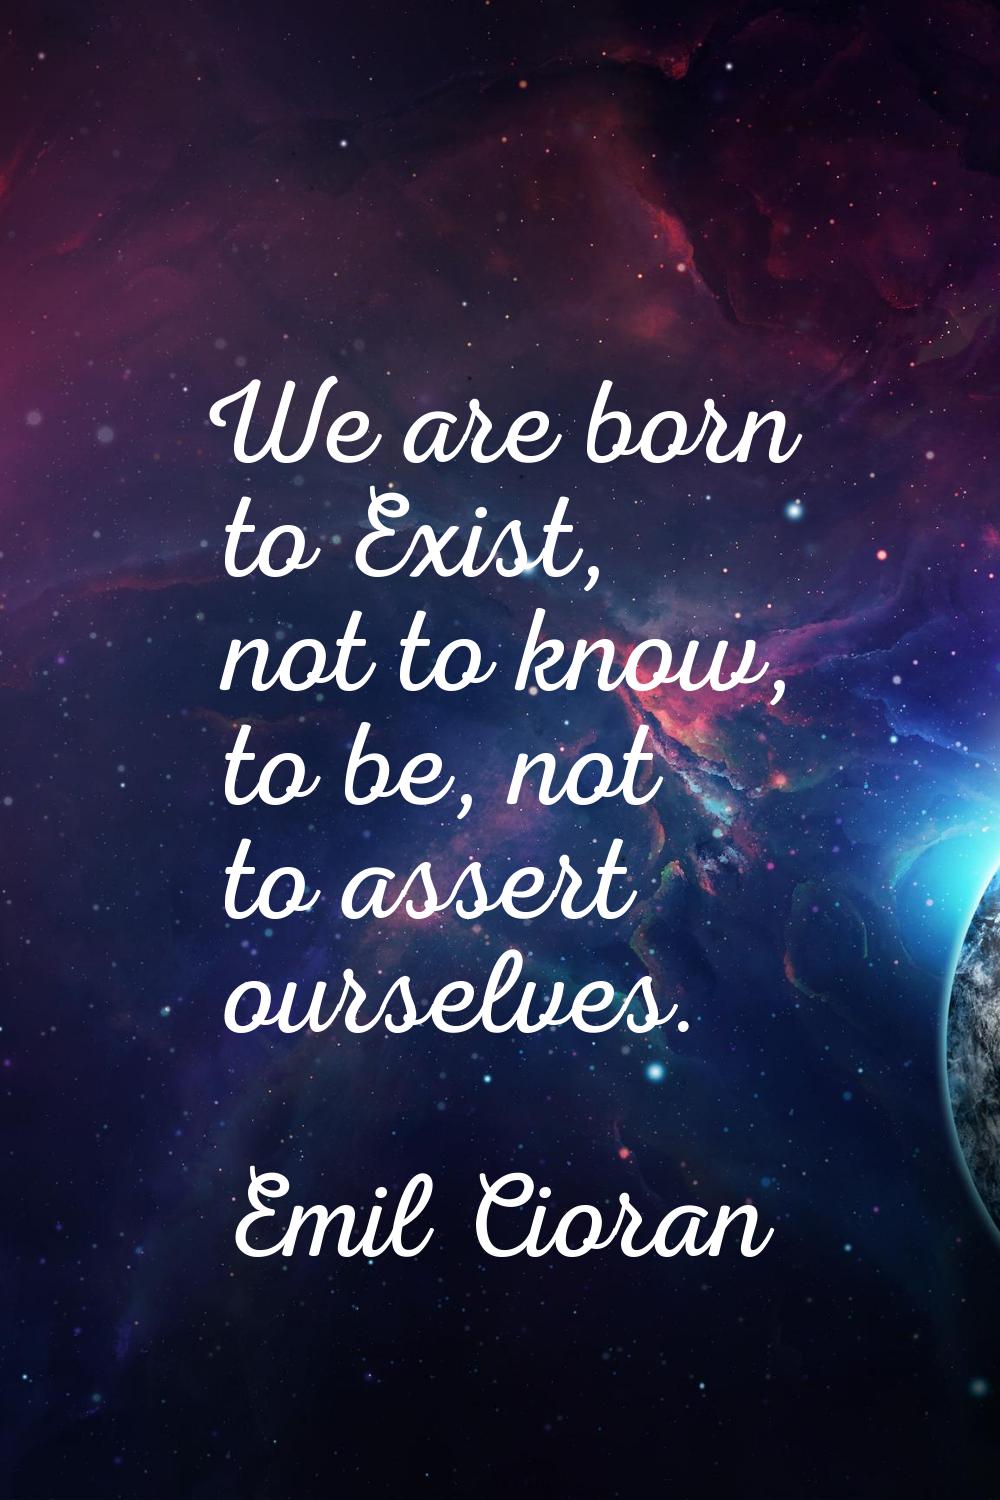 We are born to Exist, not to know, to be, not to assert ourselves.